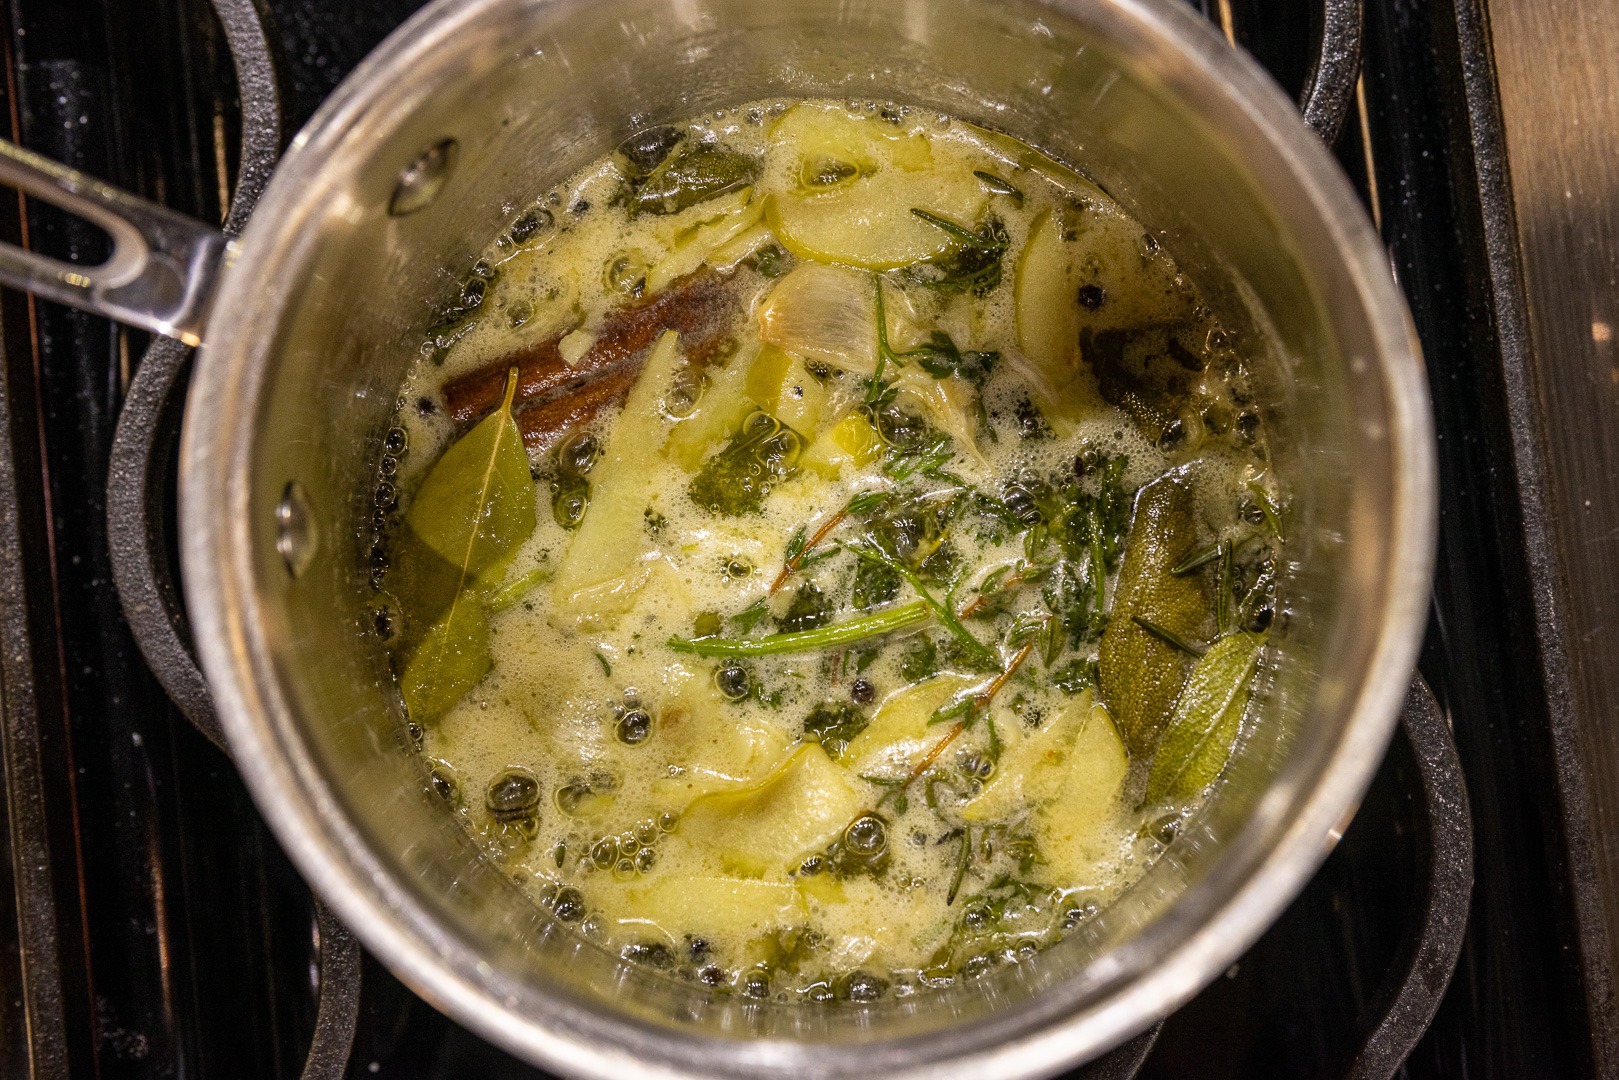 herbs ans spices simmering in butter